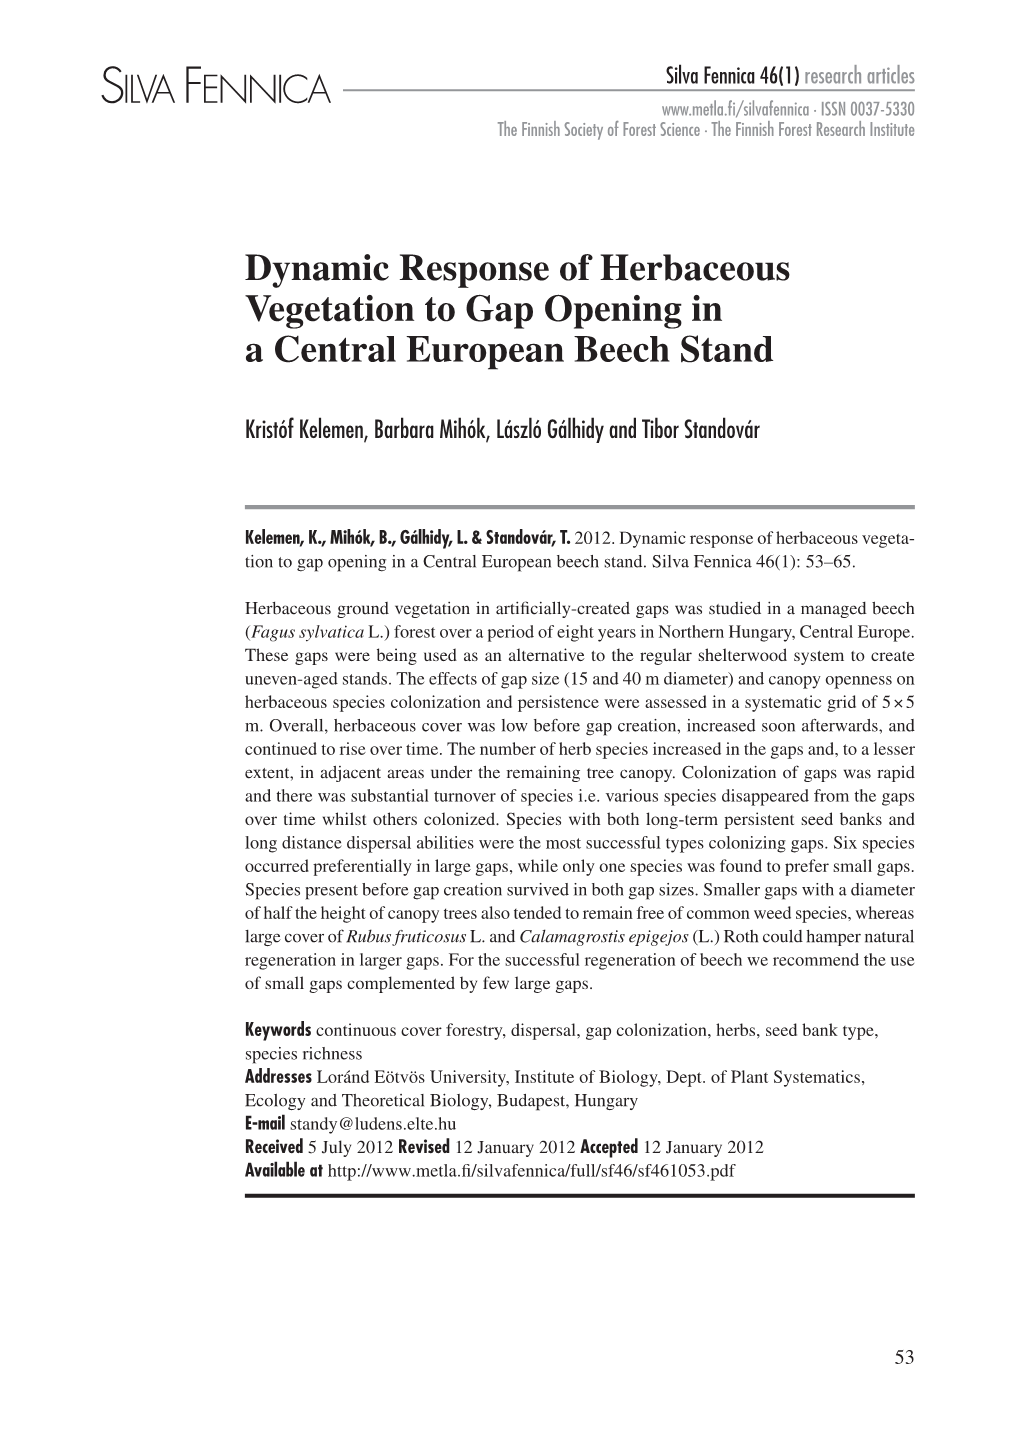 Dynamic Response of Herbaceous Vegetation to Gap Opening in a Central European Beech Stand